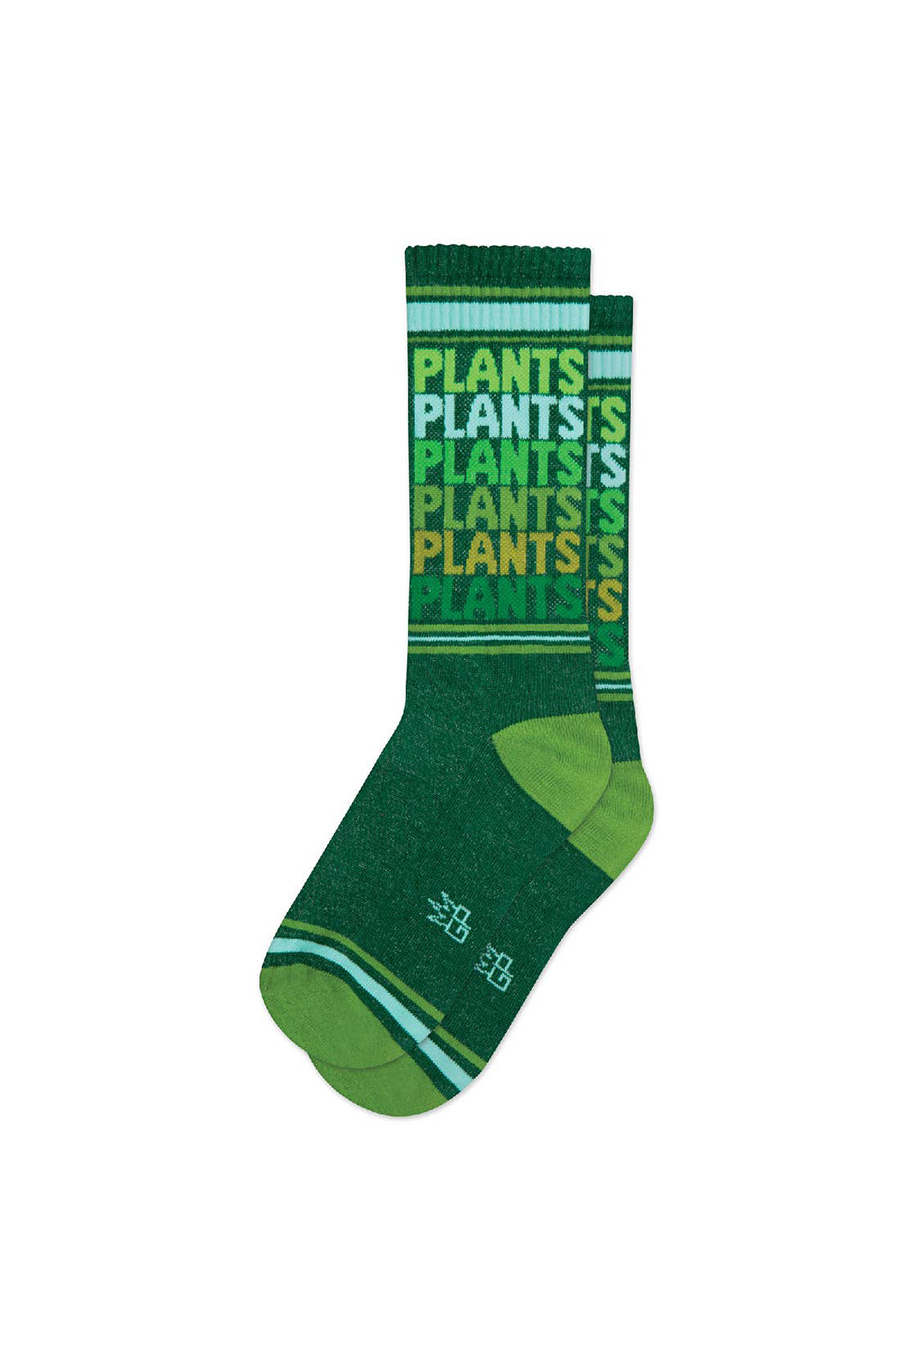 Plants Plants Ribbed Gym Sock - Main Image Number 1 of 1